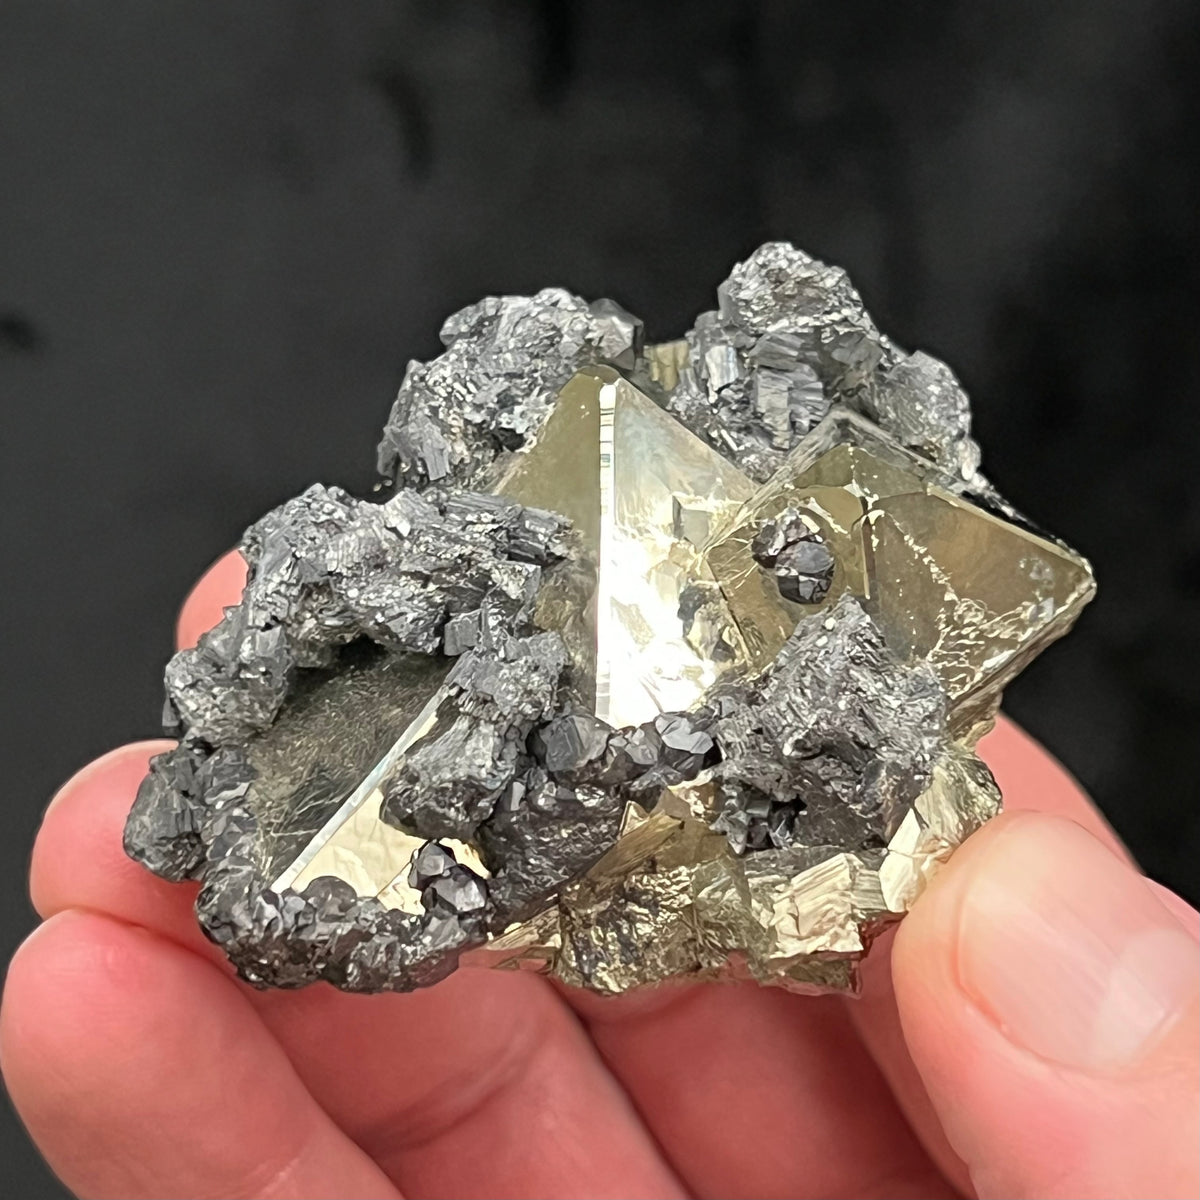 Octahedral Pyrite Larger Mirror Luster Crystals Galena 163g